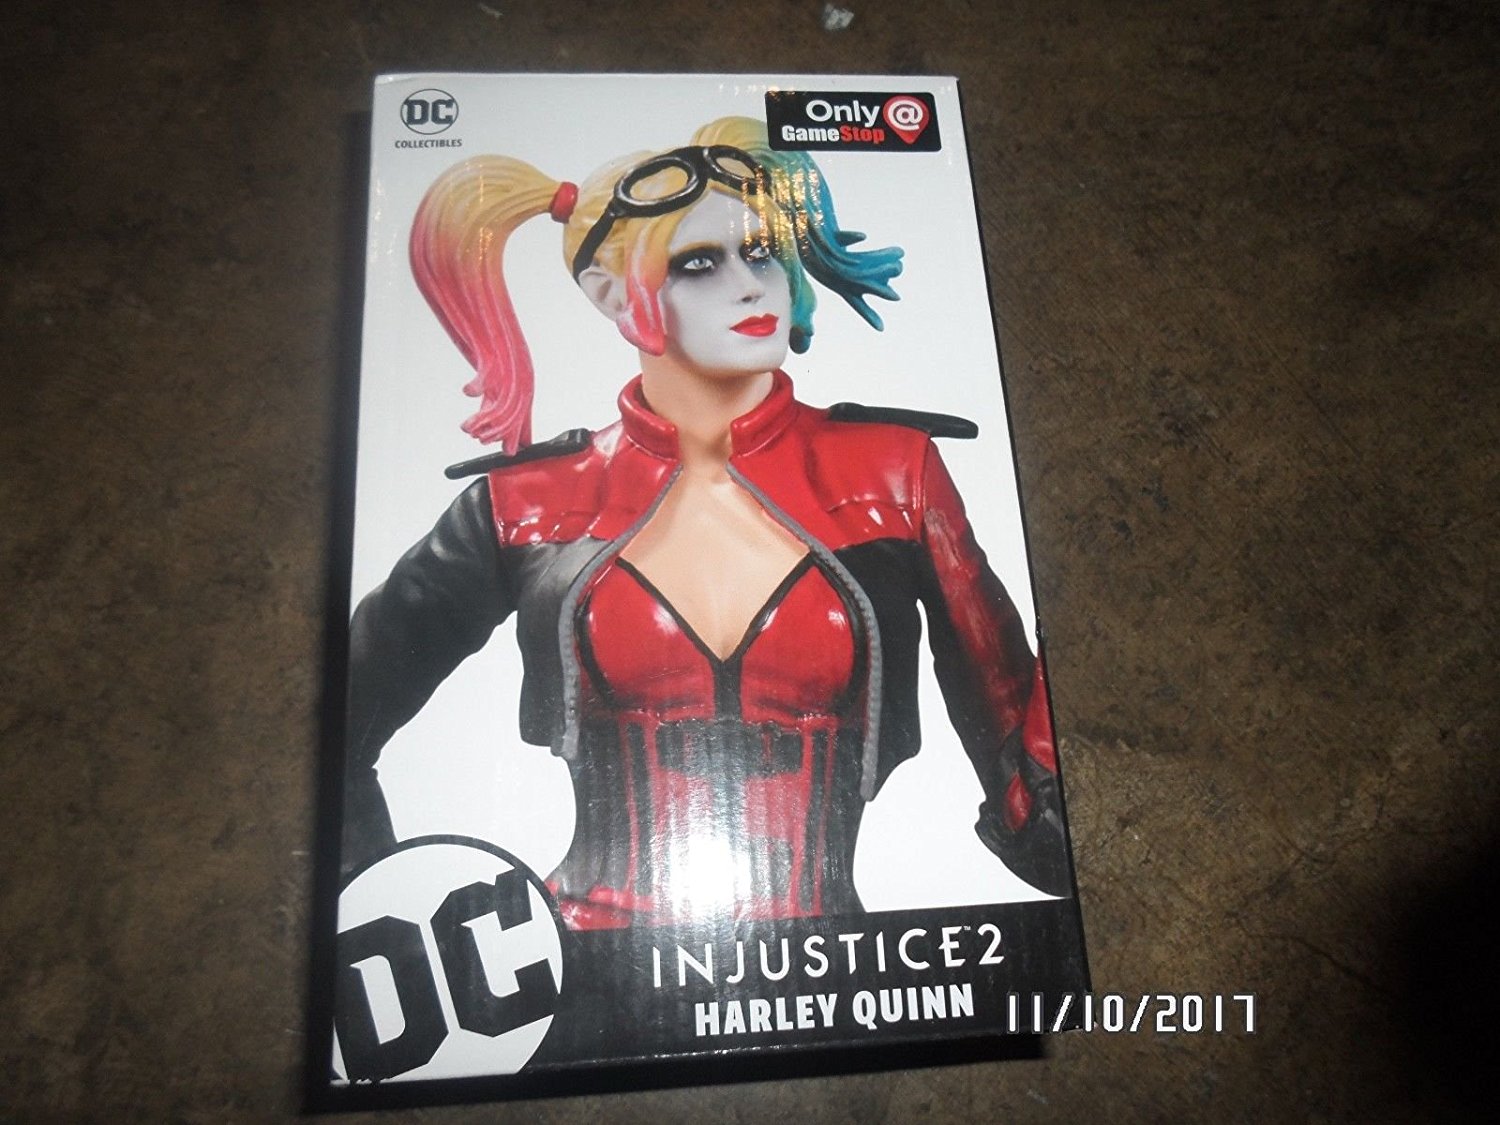 DC Comics Injustice 2 Harley Quinn Exclusive Statue with red/blue/blonde hair!